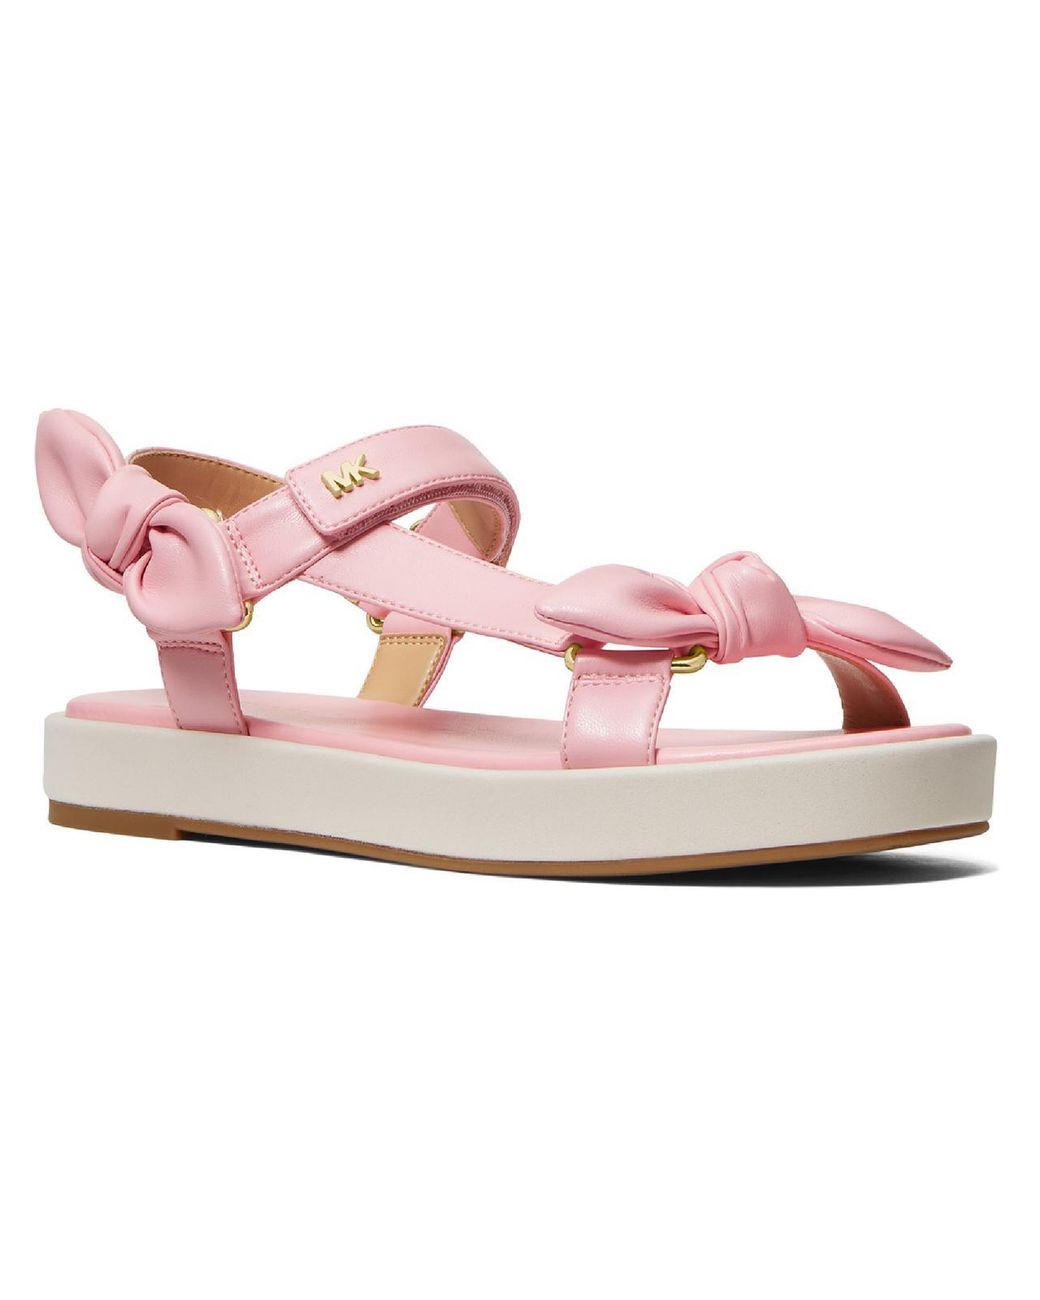 Michael Kors Phoebe Faux Leather Ankle Strap Flats in Pink | Lyst